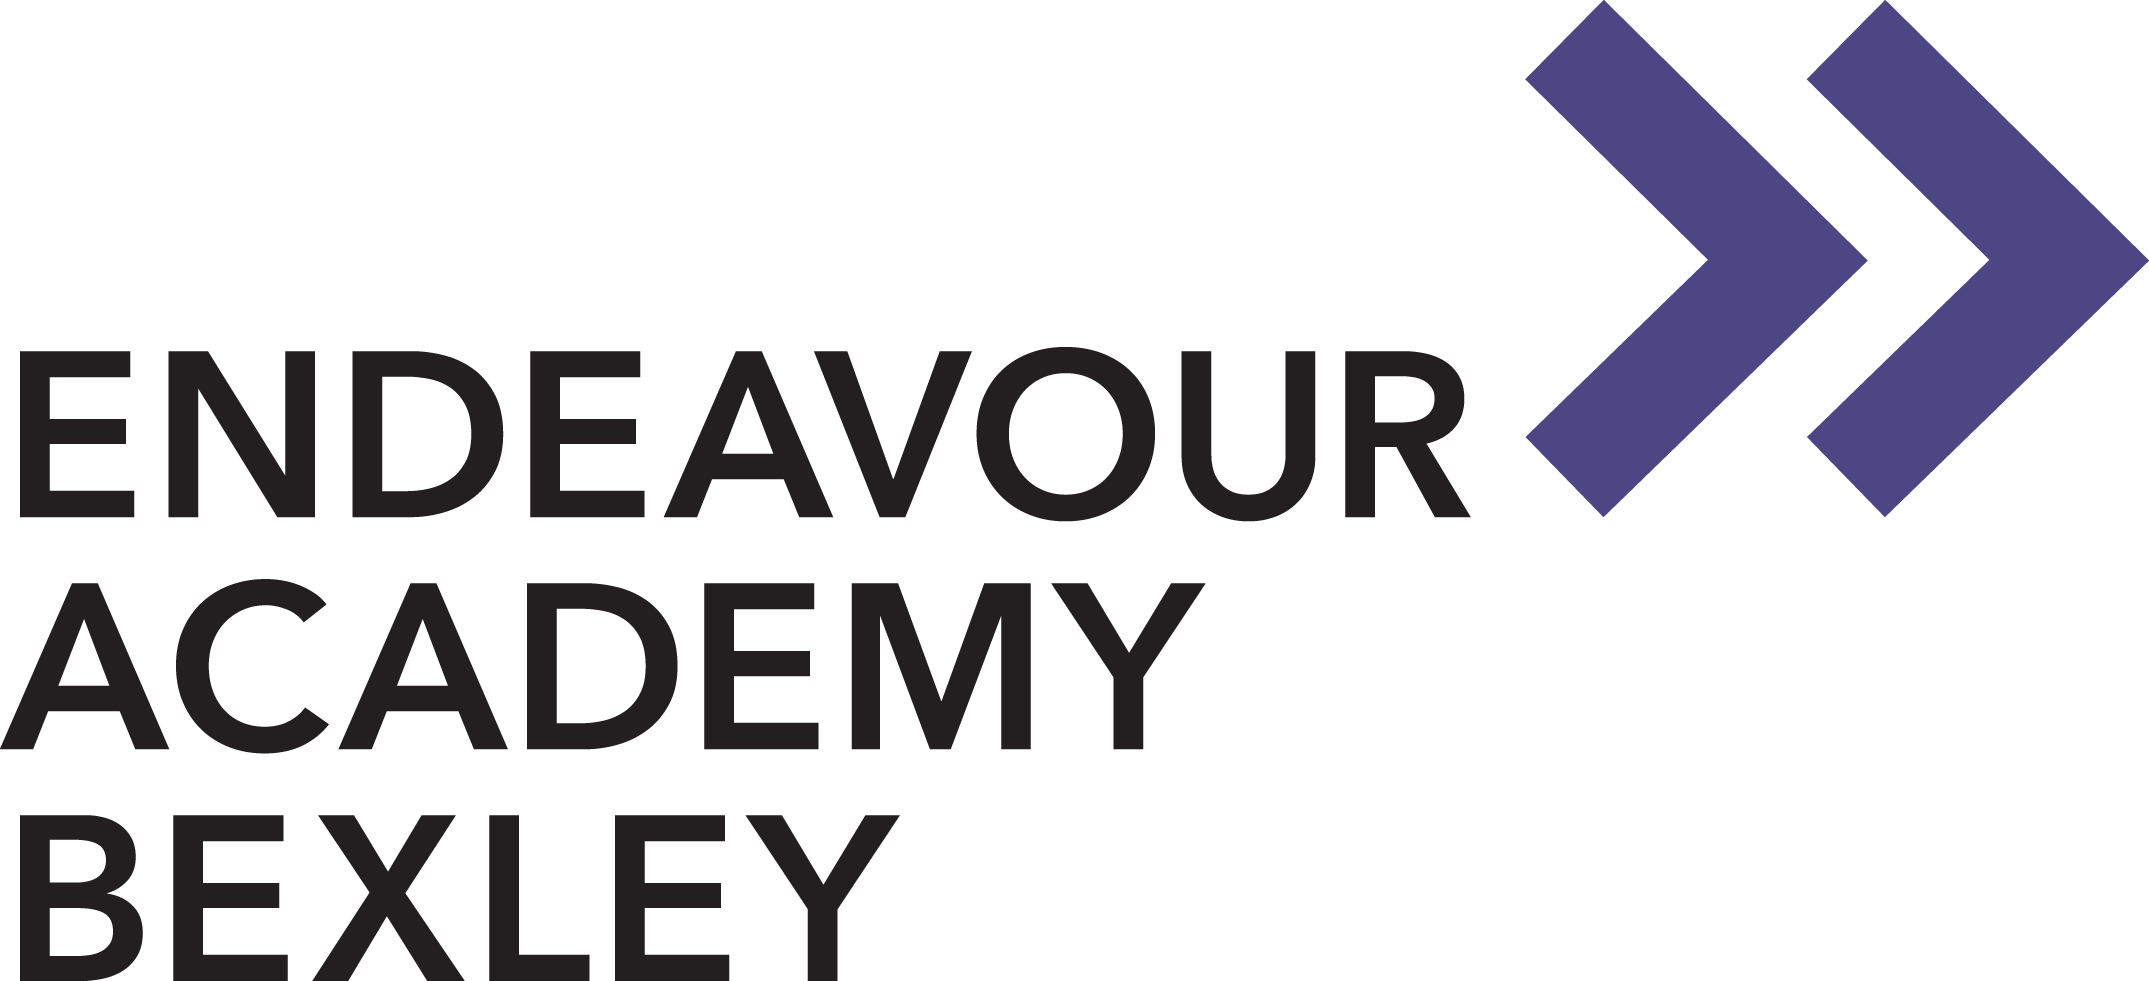 https://londonboroughofbexley-career.talent-soft.com/DynamicContent/Images/Endeavour-Academy.png